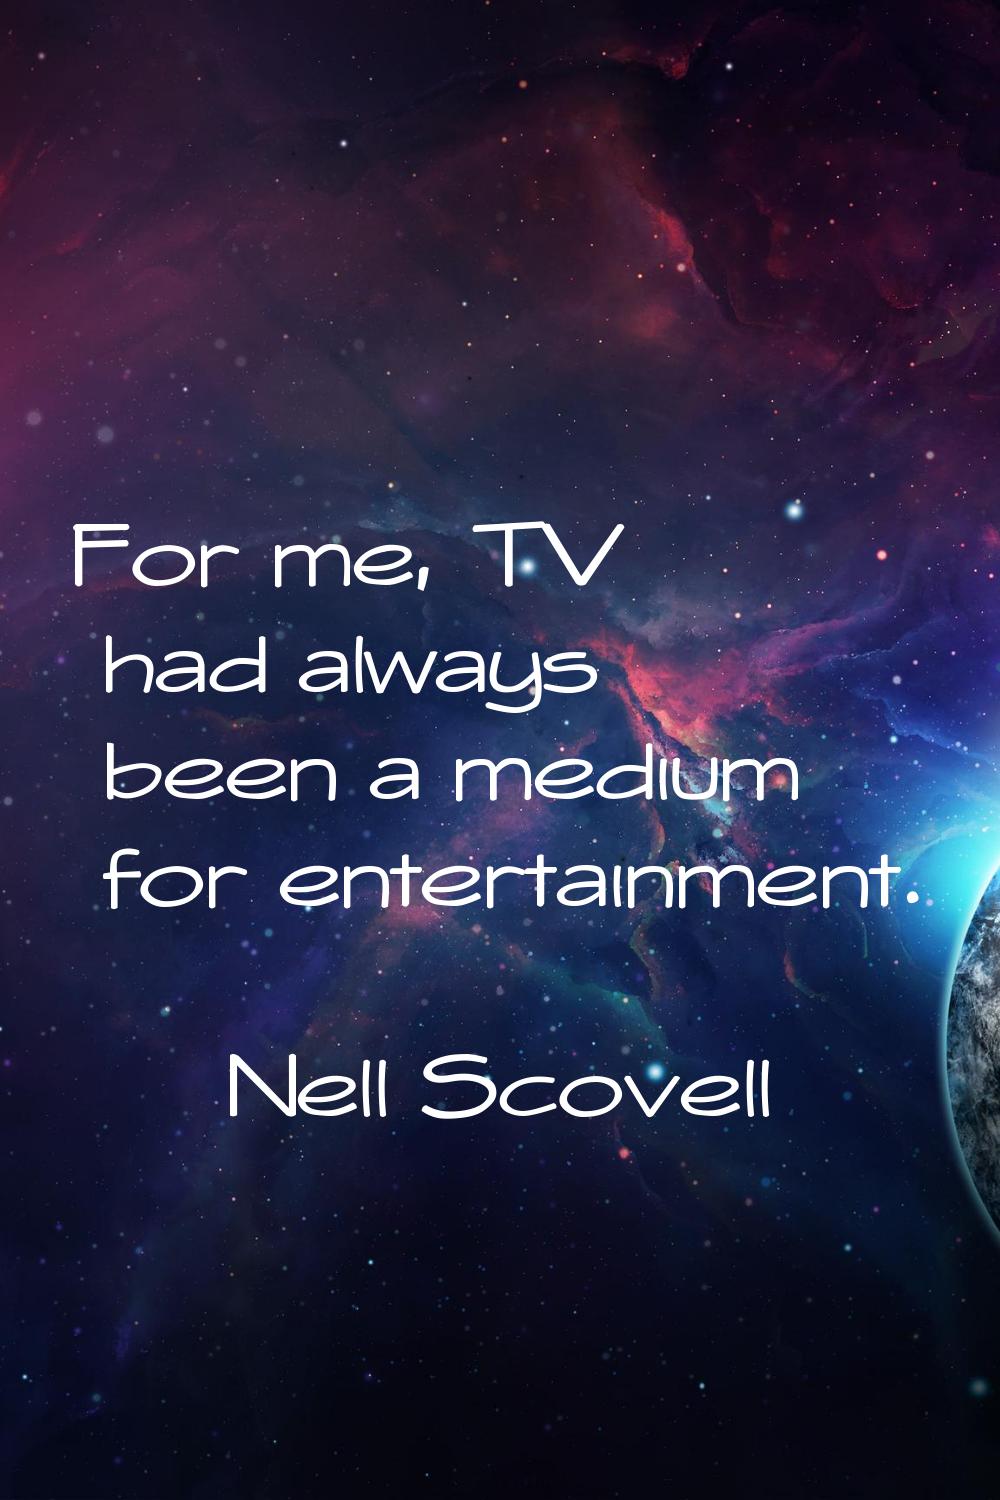 For me, TV had always been a medium for entertainment.